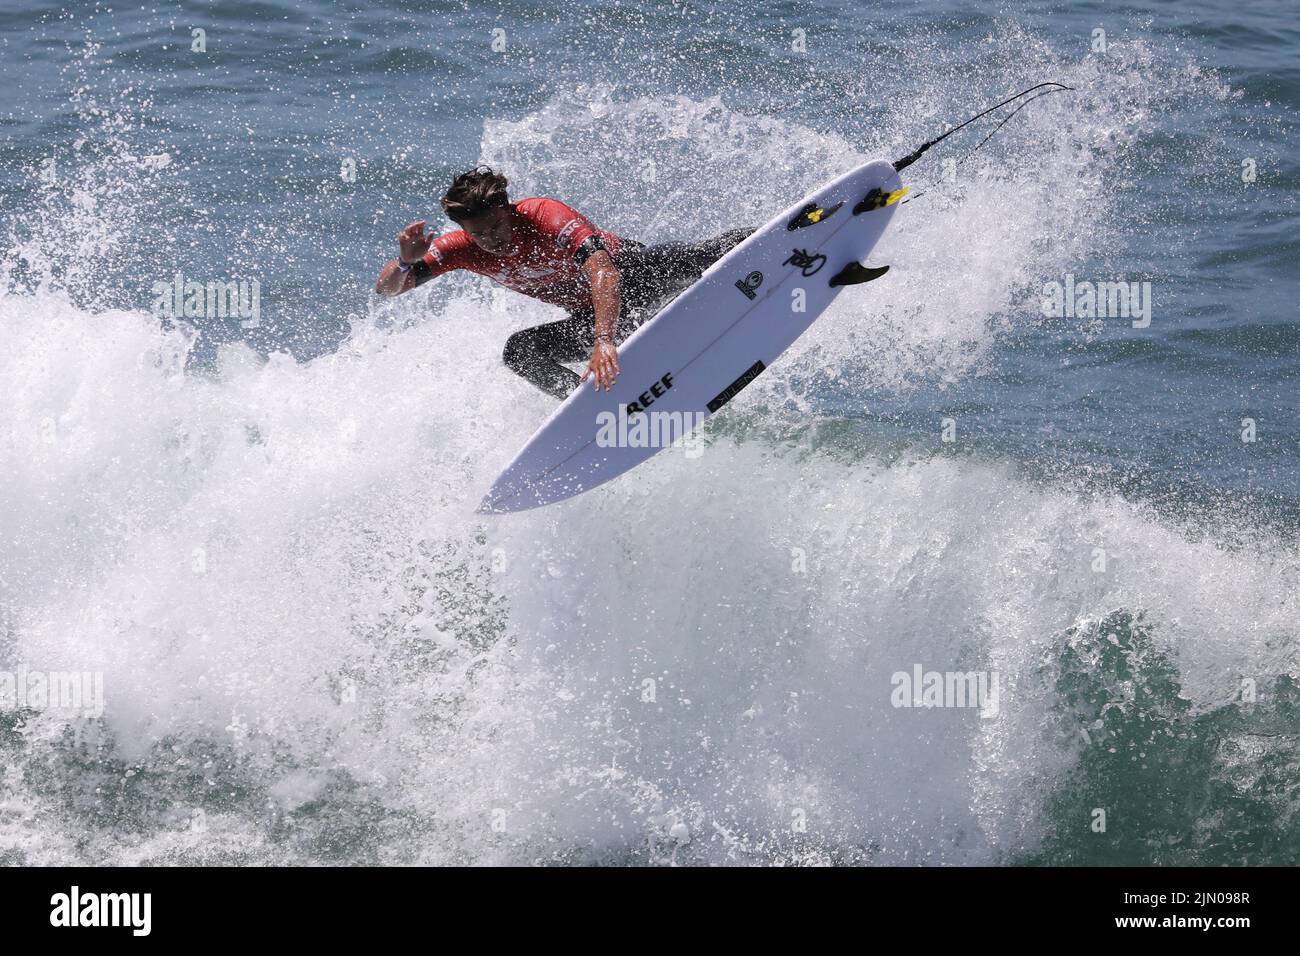 Huntington Beach. 8th Aug, 2022. A surfer is seen during the competition of the Vans US Open of Surfing at Huntington Beach, California, the United States on Aug. 7, 2022. Credit: Xinhua/Alamy Live News Stock Photo